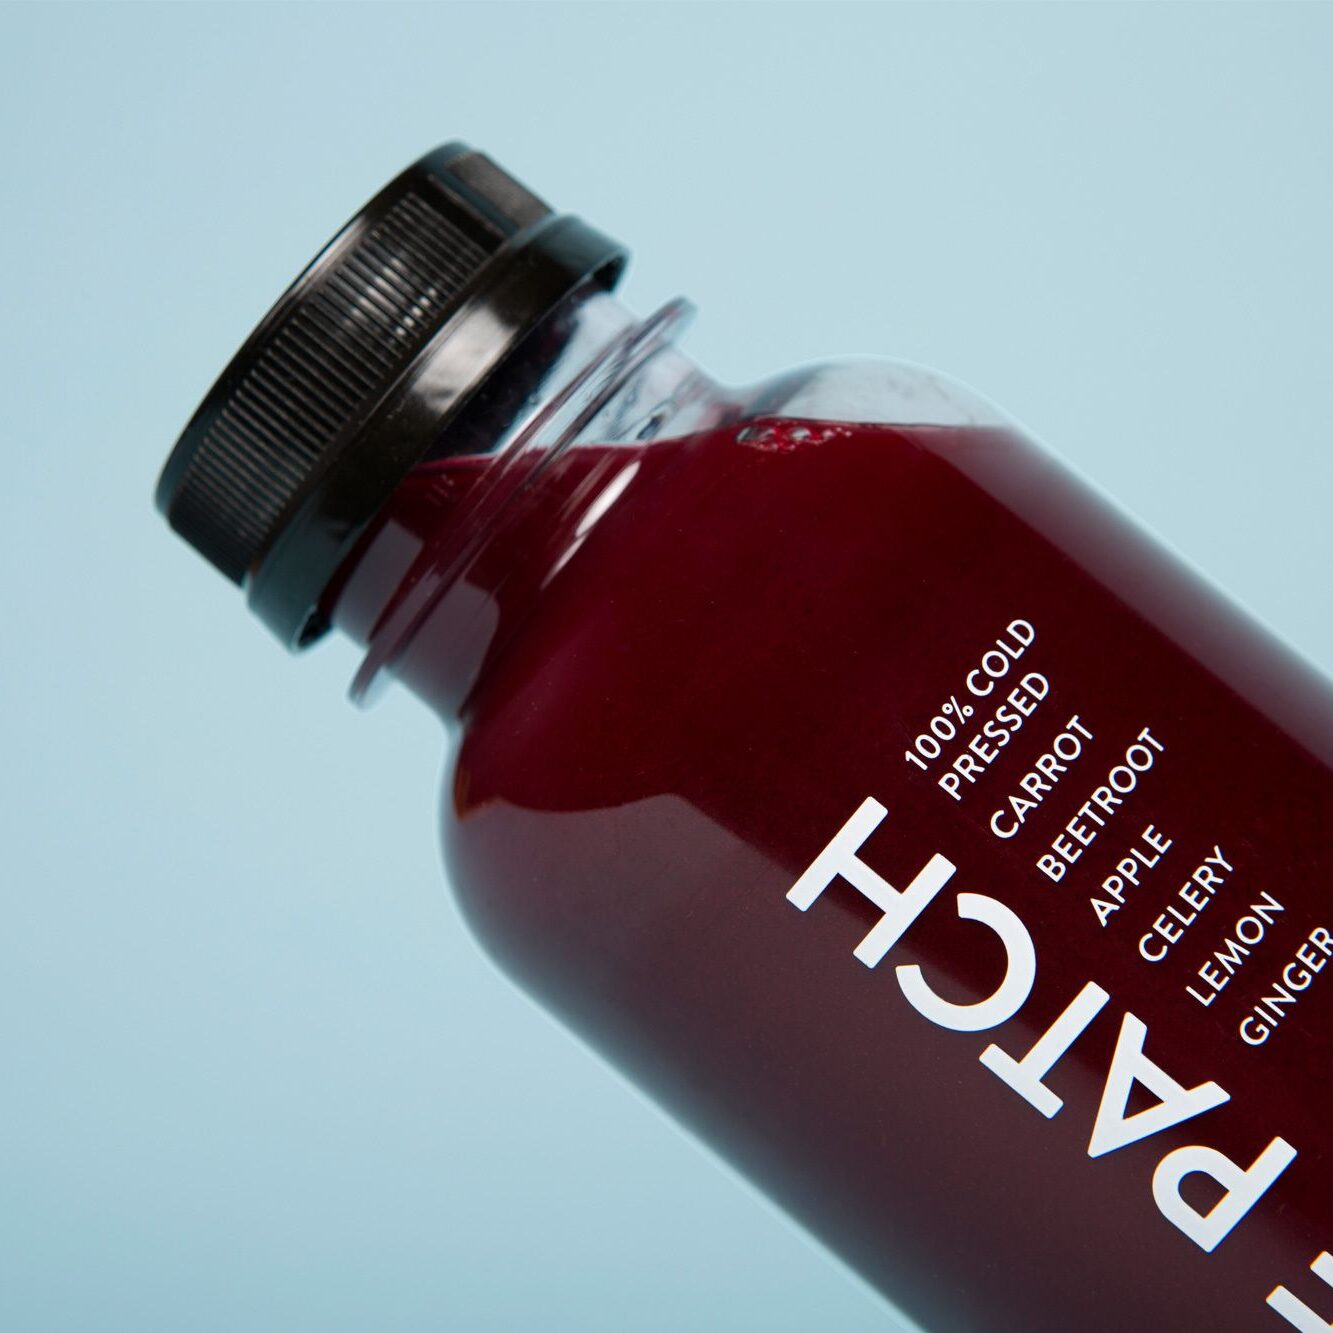 hunterand projects sensory lab pressed juice packaging 1